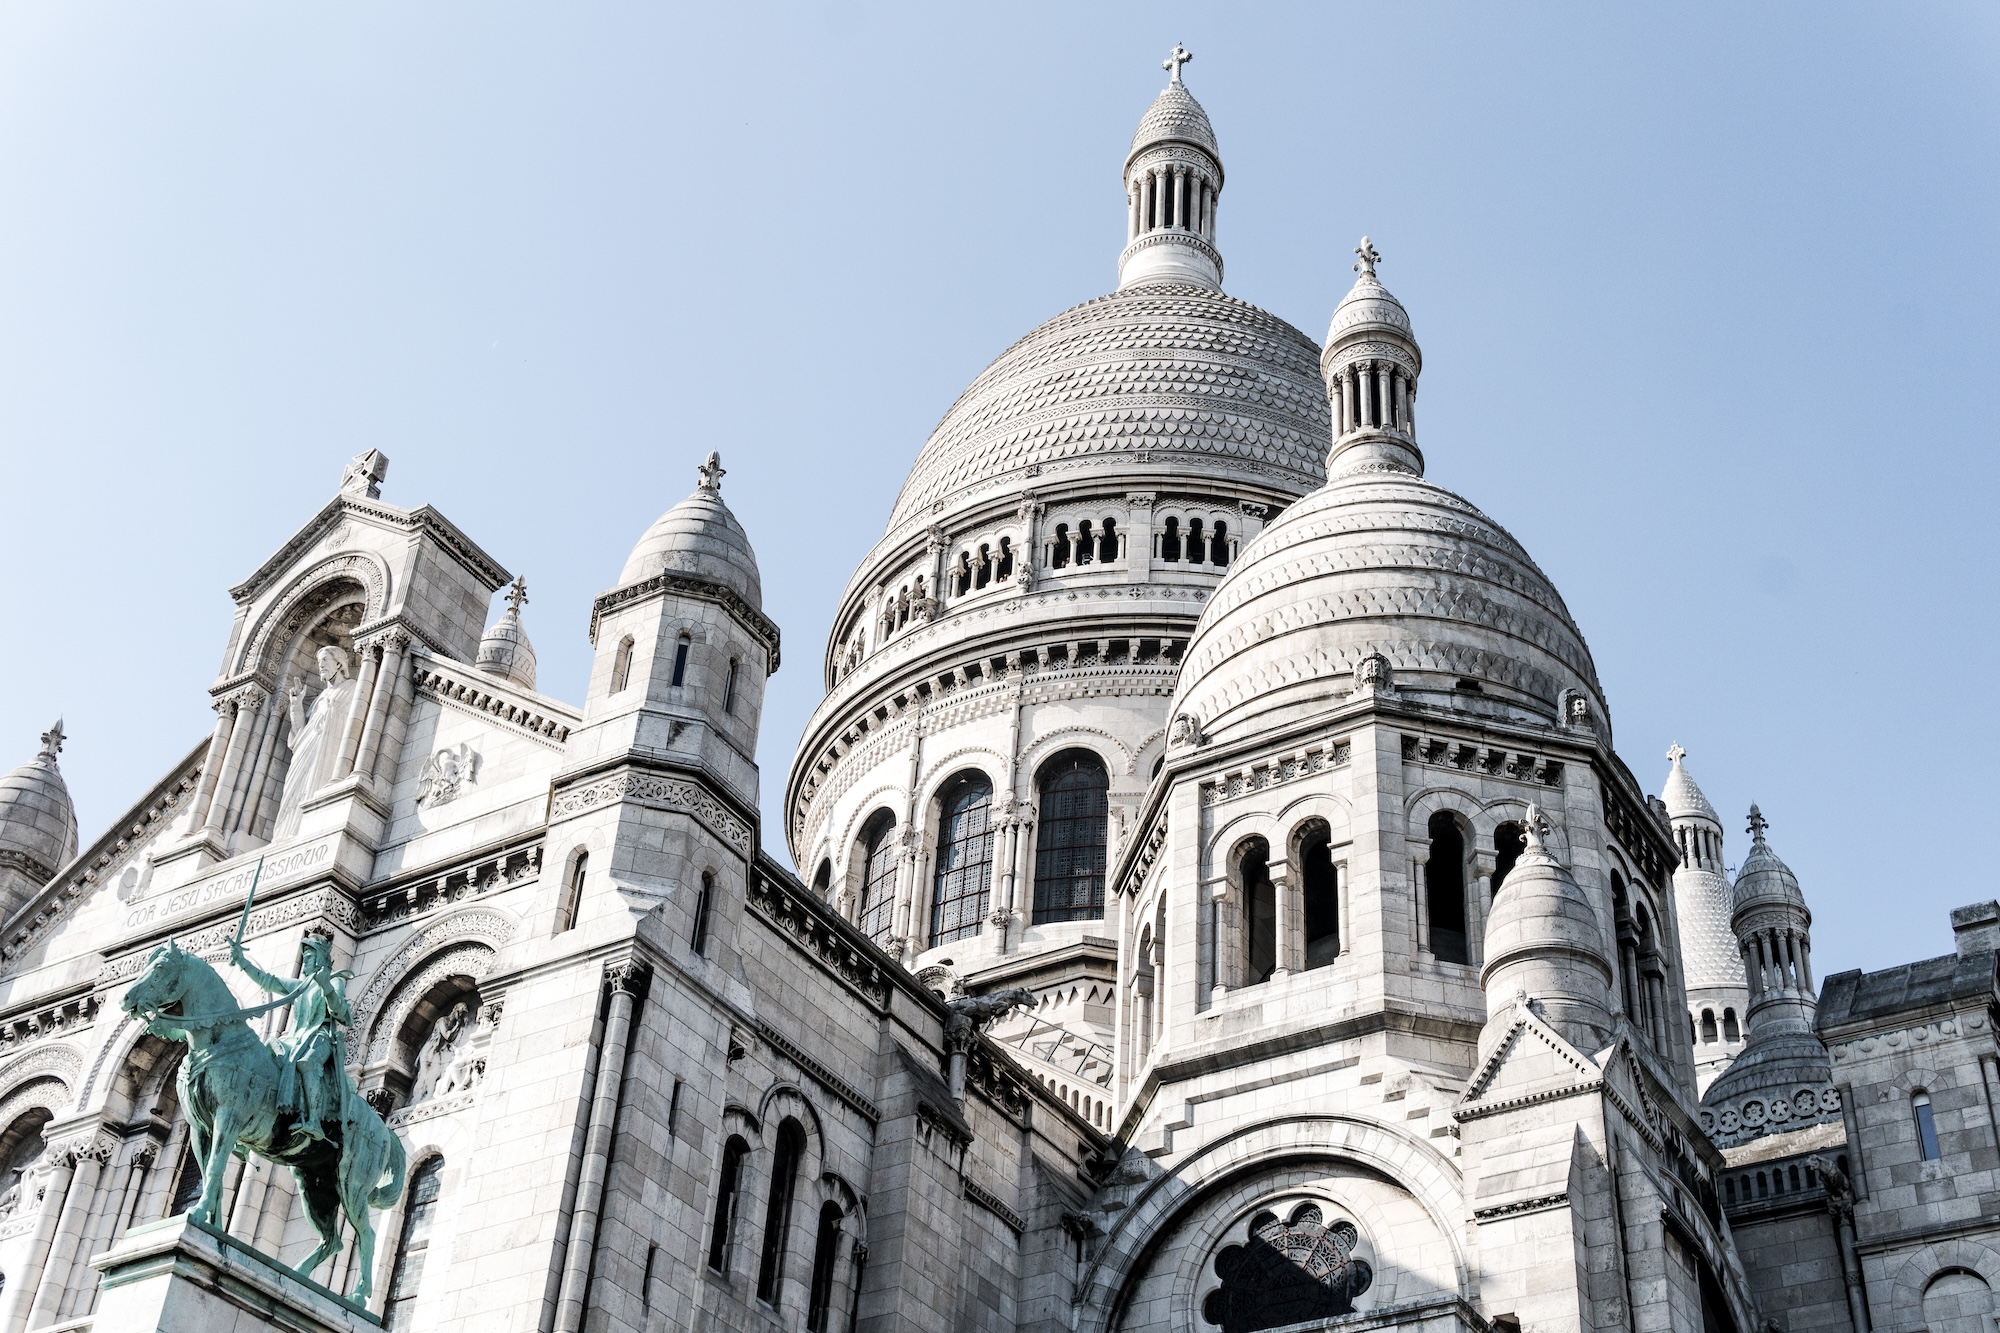 A beautiful low angle shot of the famous Sacre-Coeur cathedral in Paris, France